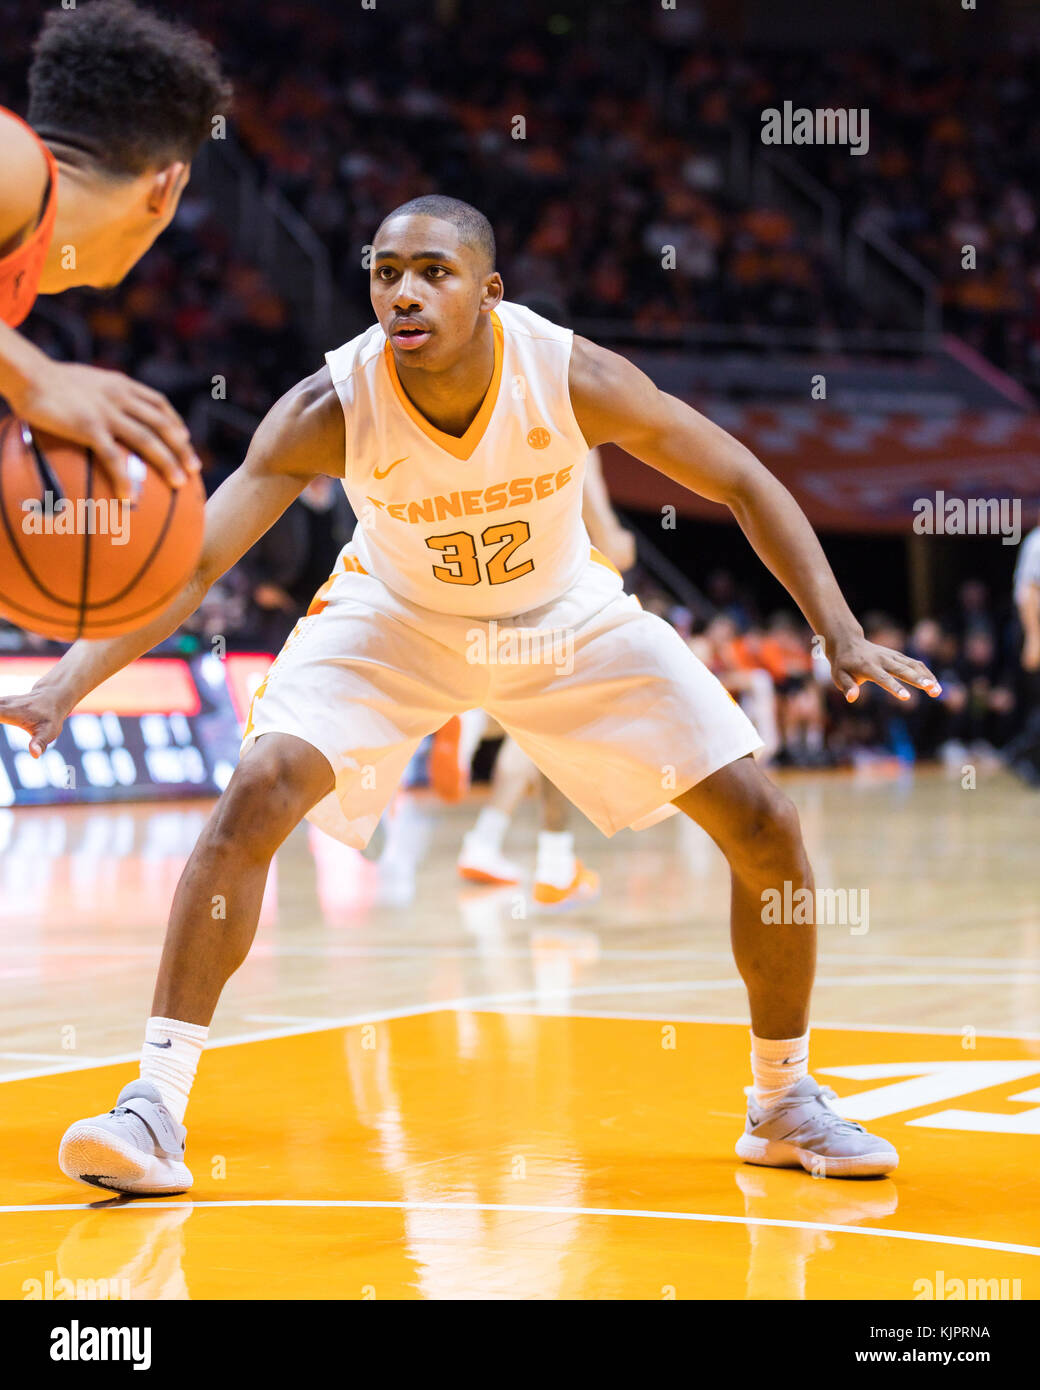 November 29, 2017: Chris Darrington #32 of the Tennessee Volunteers defends during the NCAA basketball game between the University of Tennessee Volunteers and the Mercer University Bears at Thompson Boling Arena in Knoxville TN Tim Gangloff/CSM Stock Photo